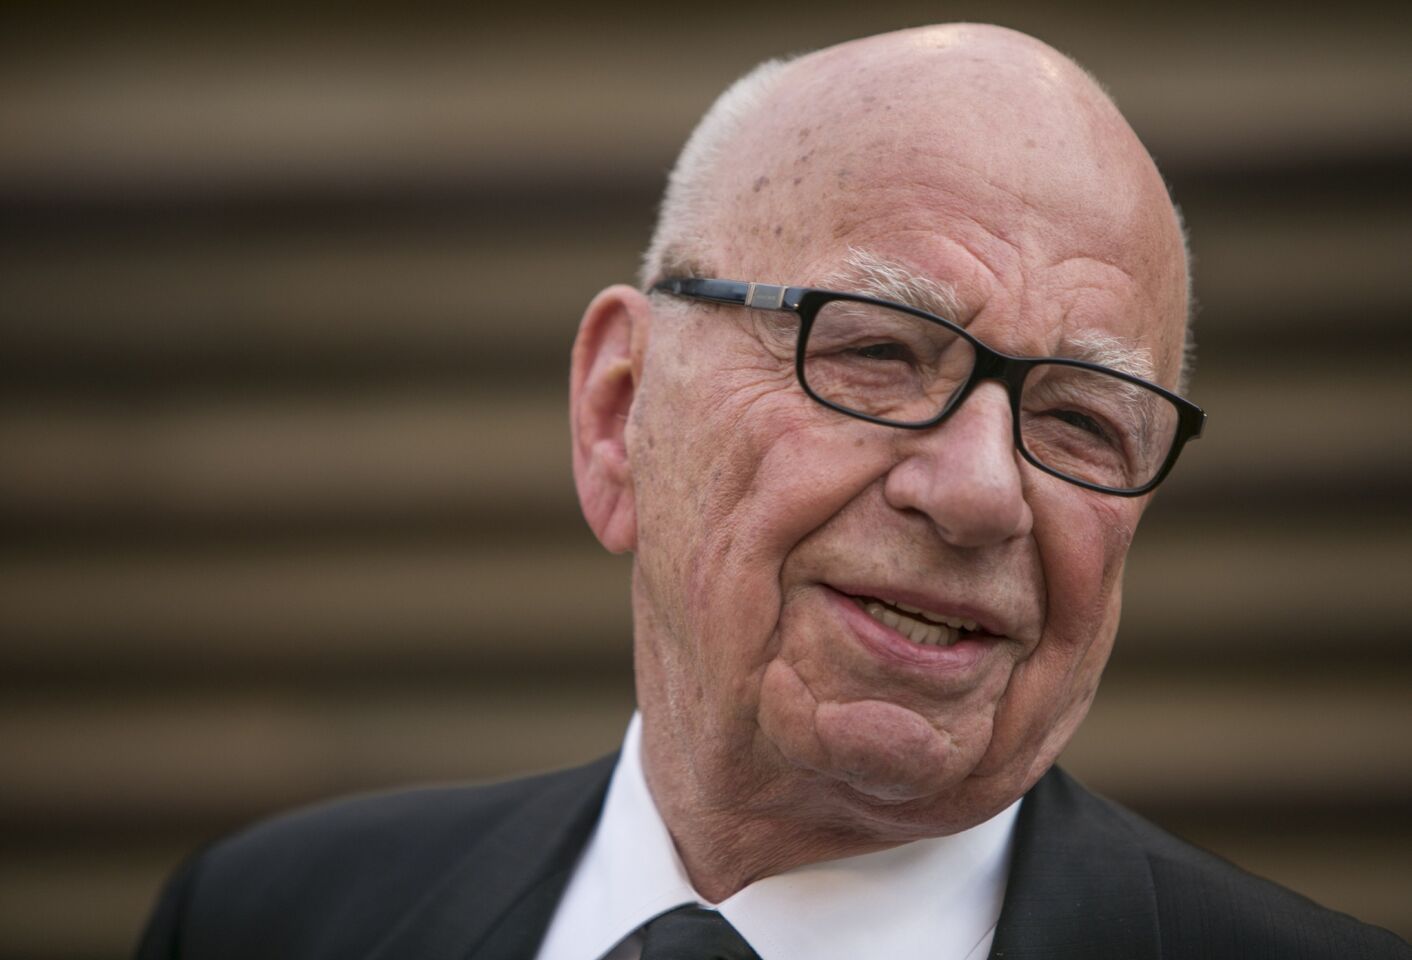 Murdoch, chief executive of 21st Century Fox, received a compensation package of $28.9 million. On top of an $8.1-million base salary, he received a performance-based cash bonus of $12.5 million and stock awards valued at $5.1 million.